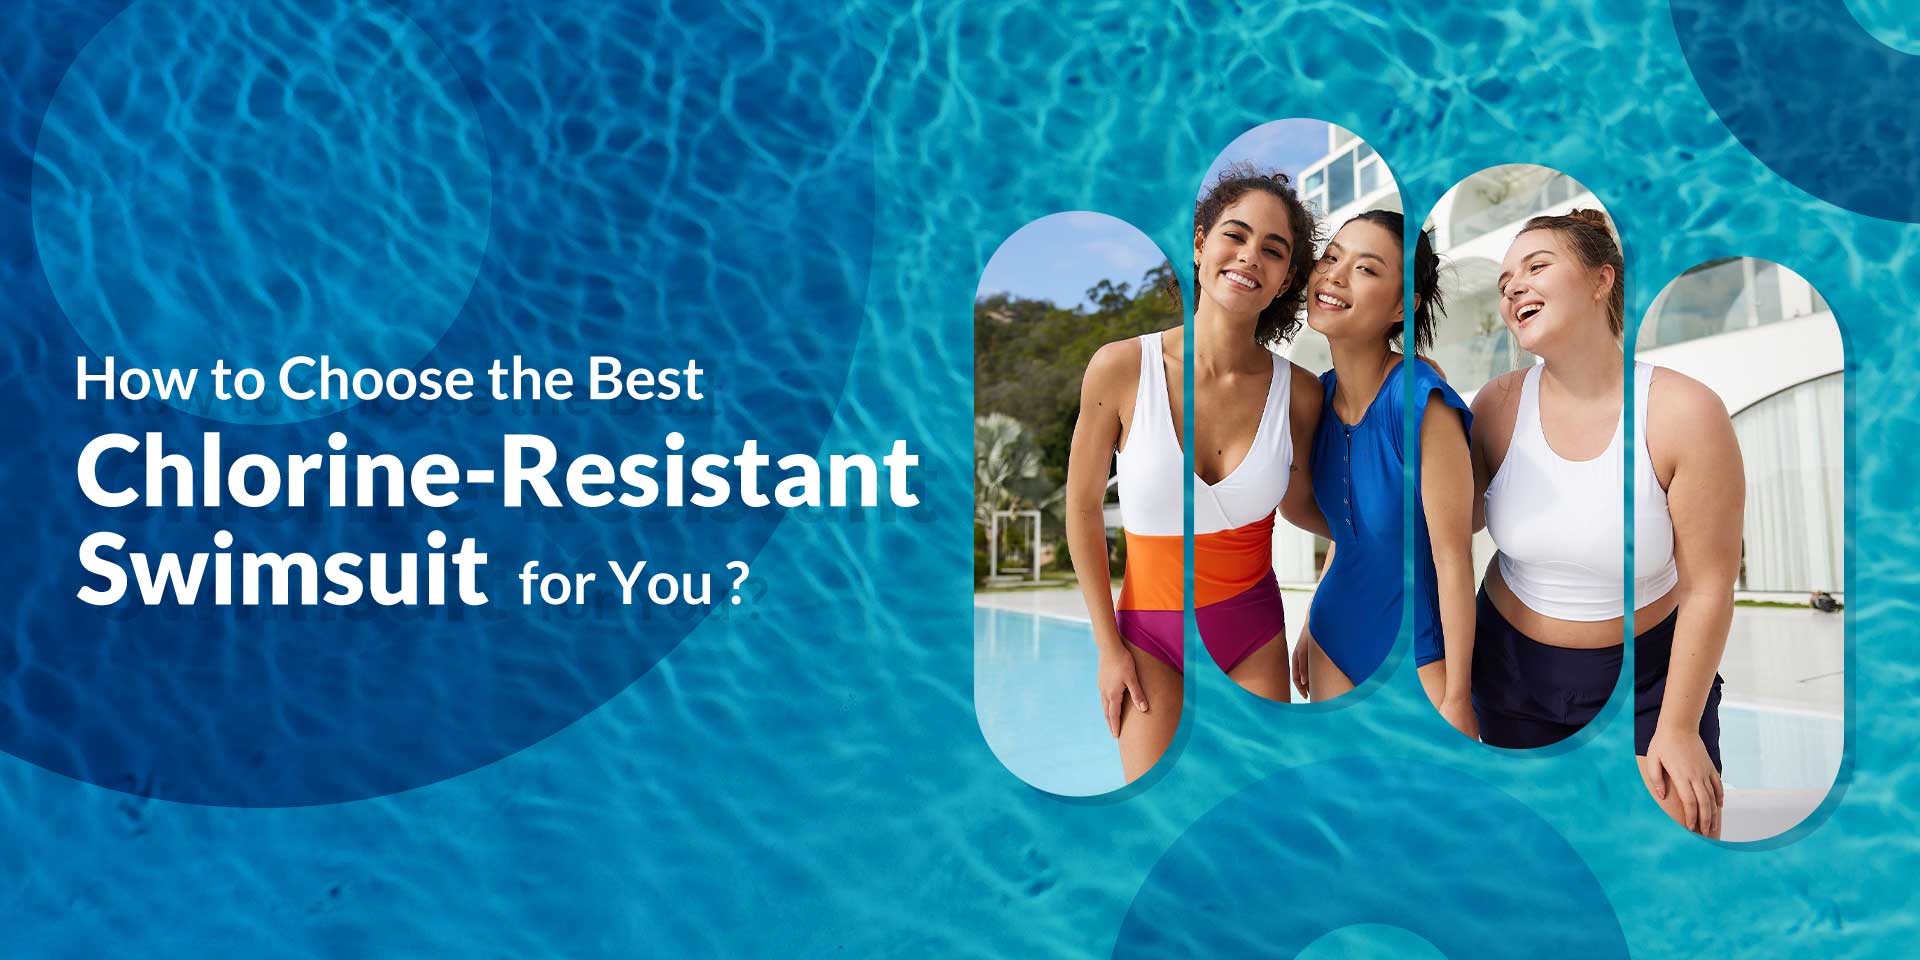 How to Choose the Best Chlorine-Resistant Swimsuit for You